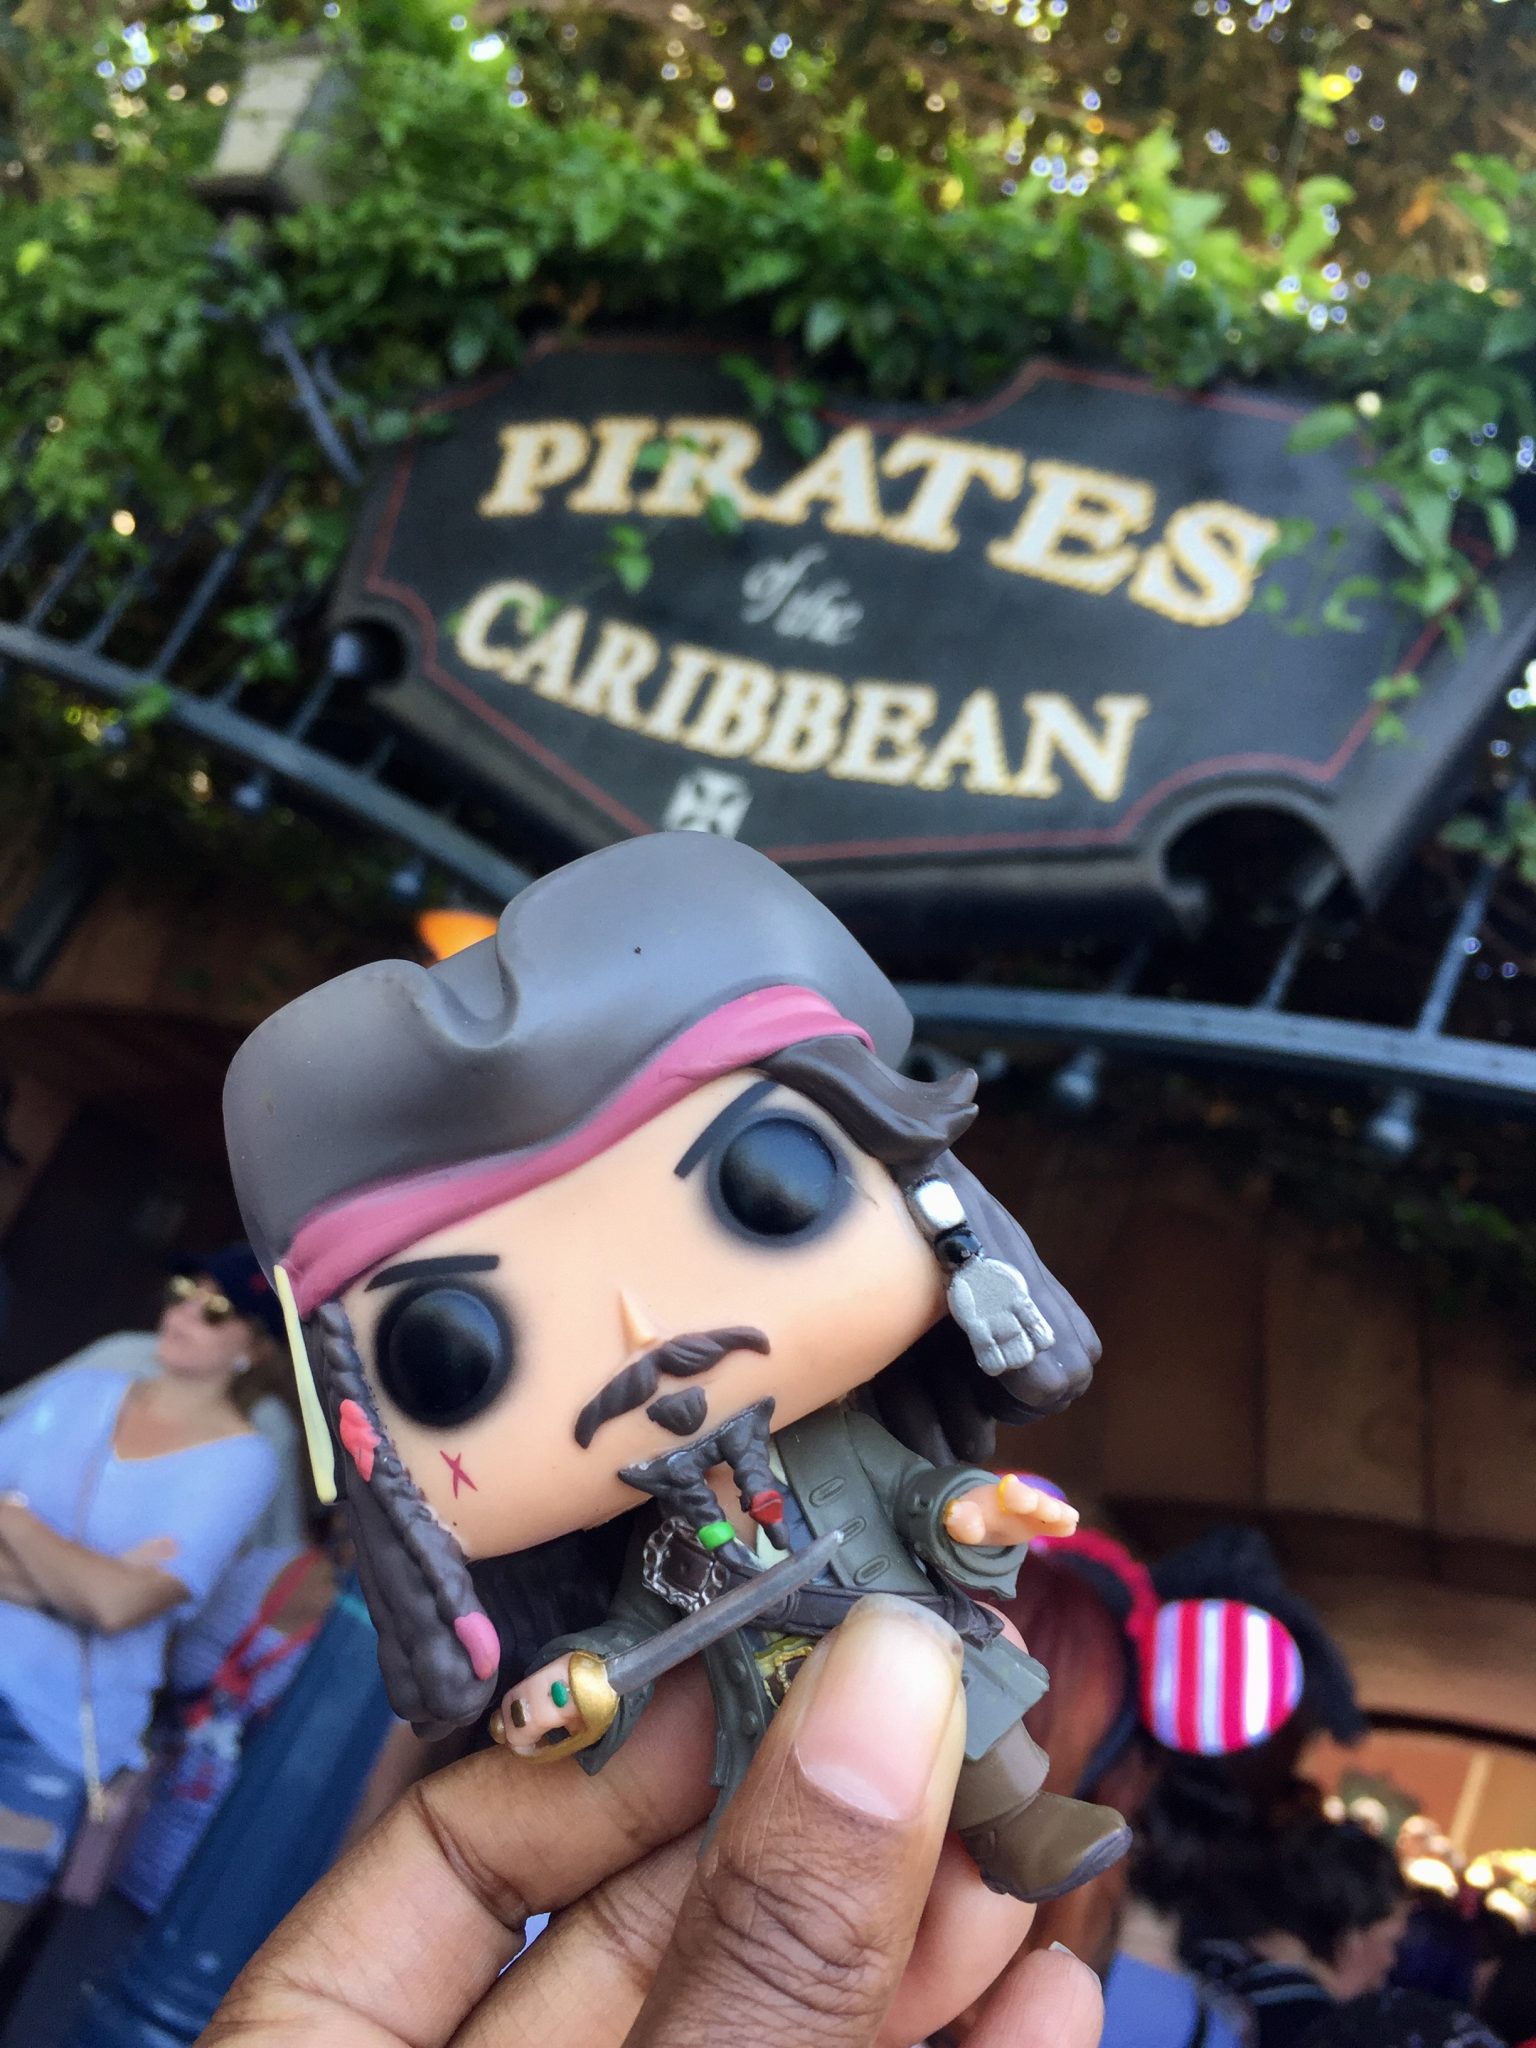 My Disneyland “Pirates of the Caribbean” Ride Experience